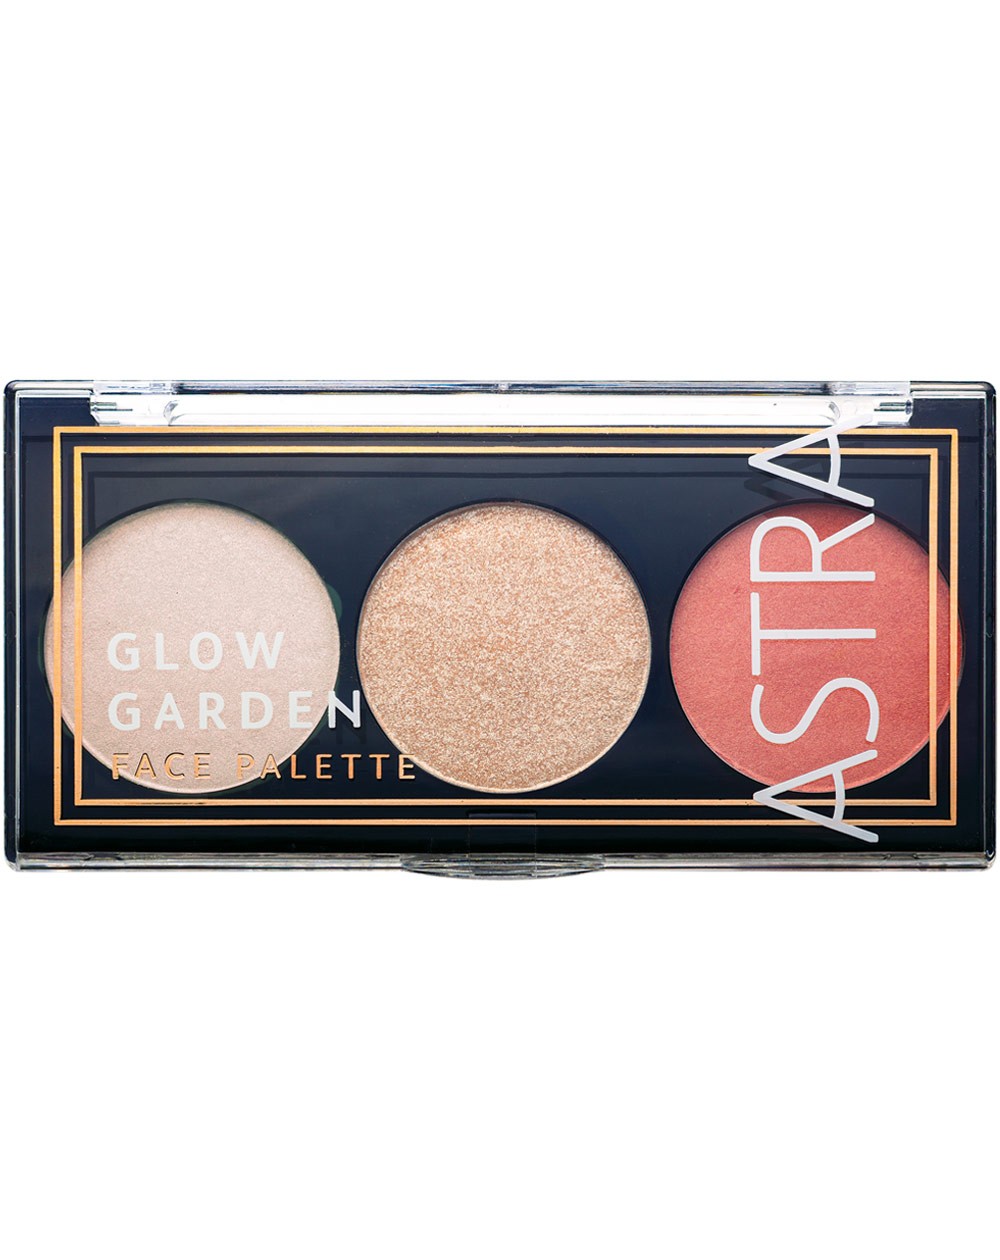 Astra Glow Garden Face Palette - RossoLaccaStore